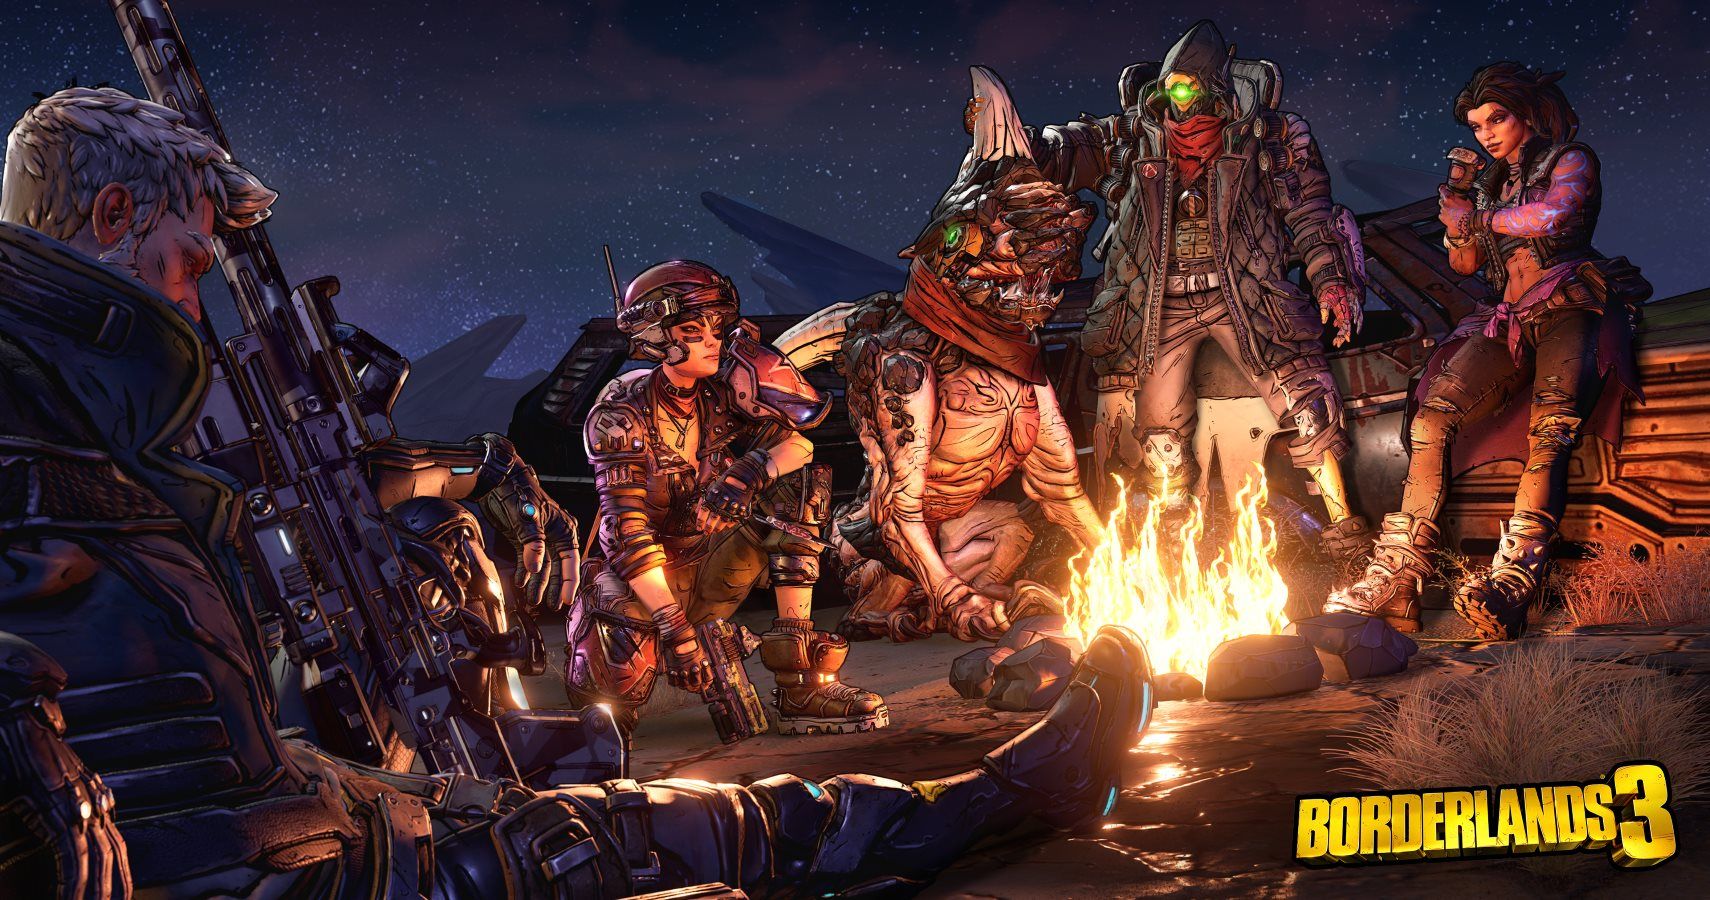 Borderlands 3 Will Give Us A “First Hands-On Look” At Gameplay On May 1